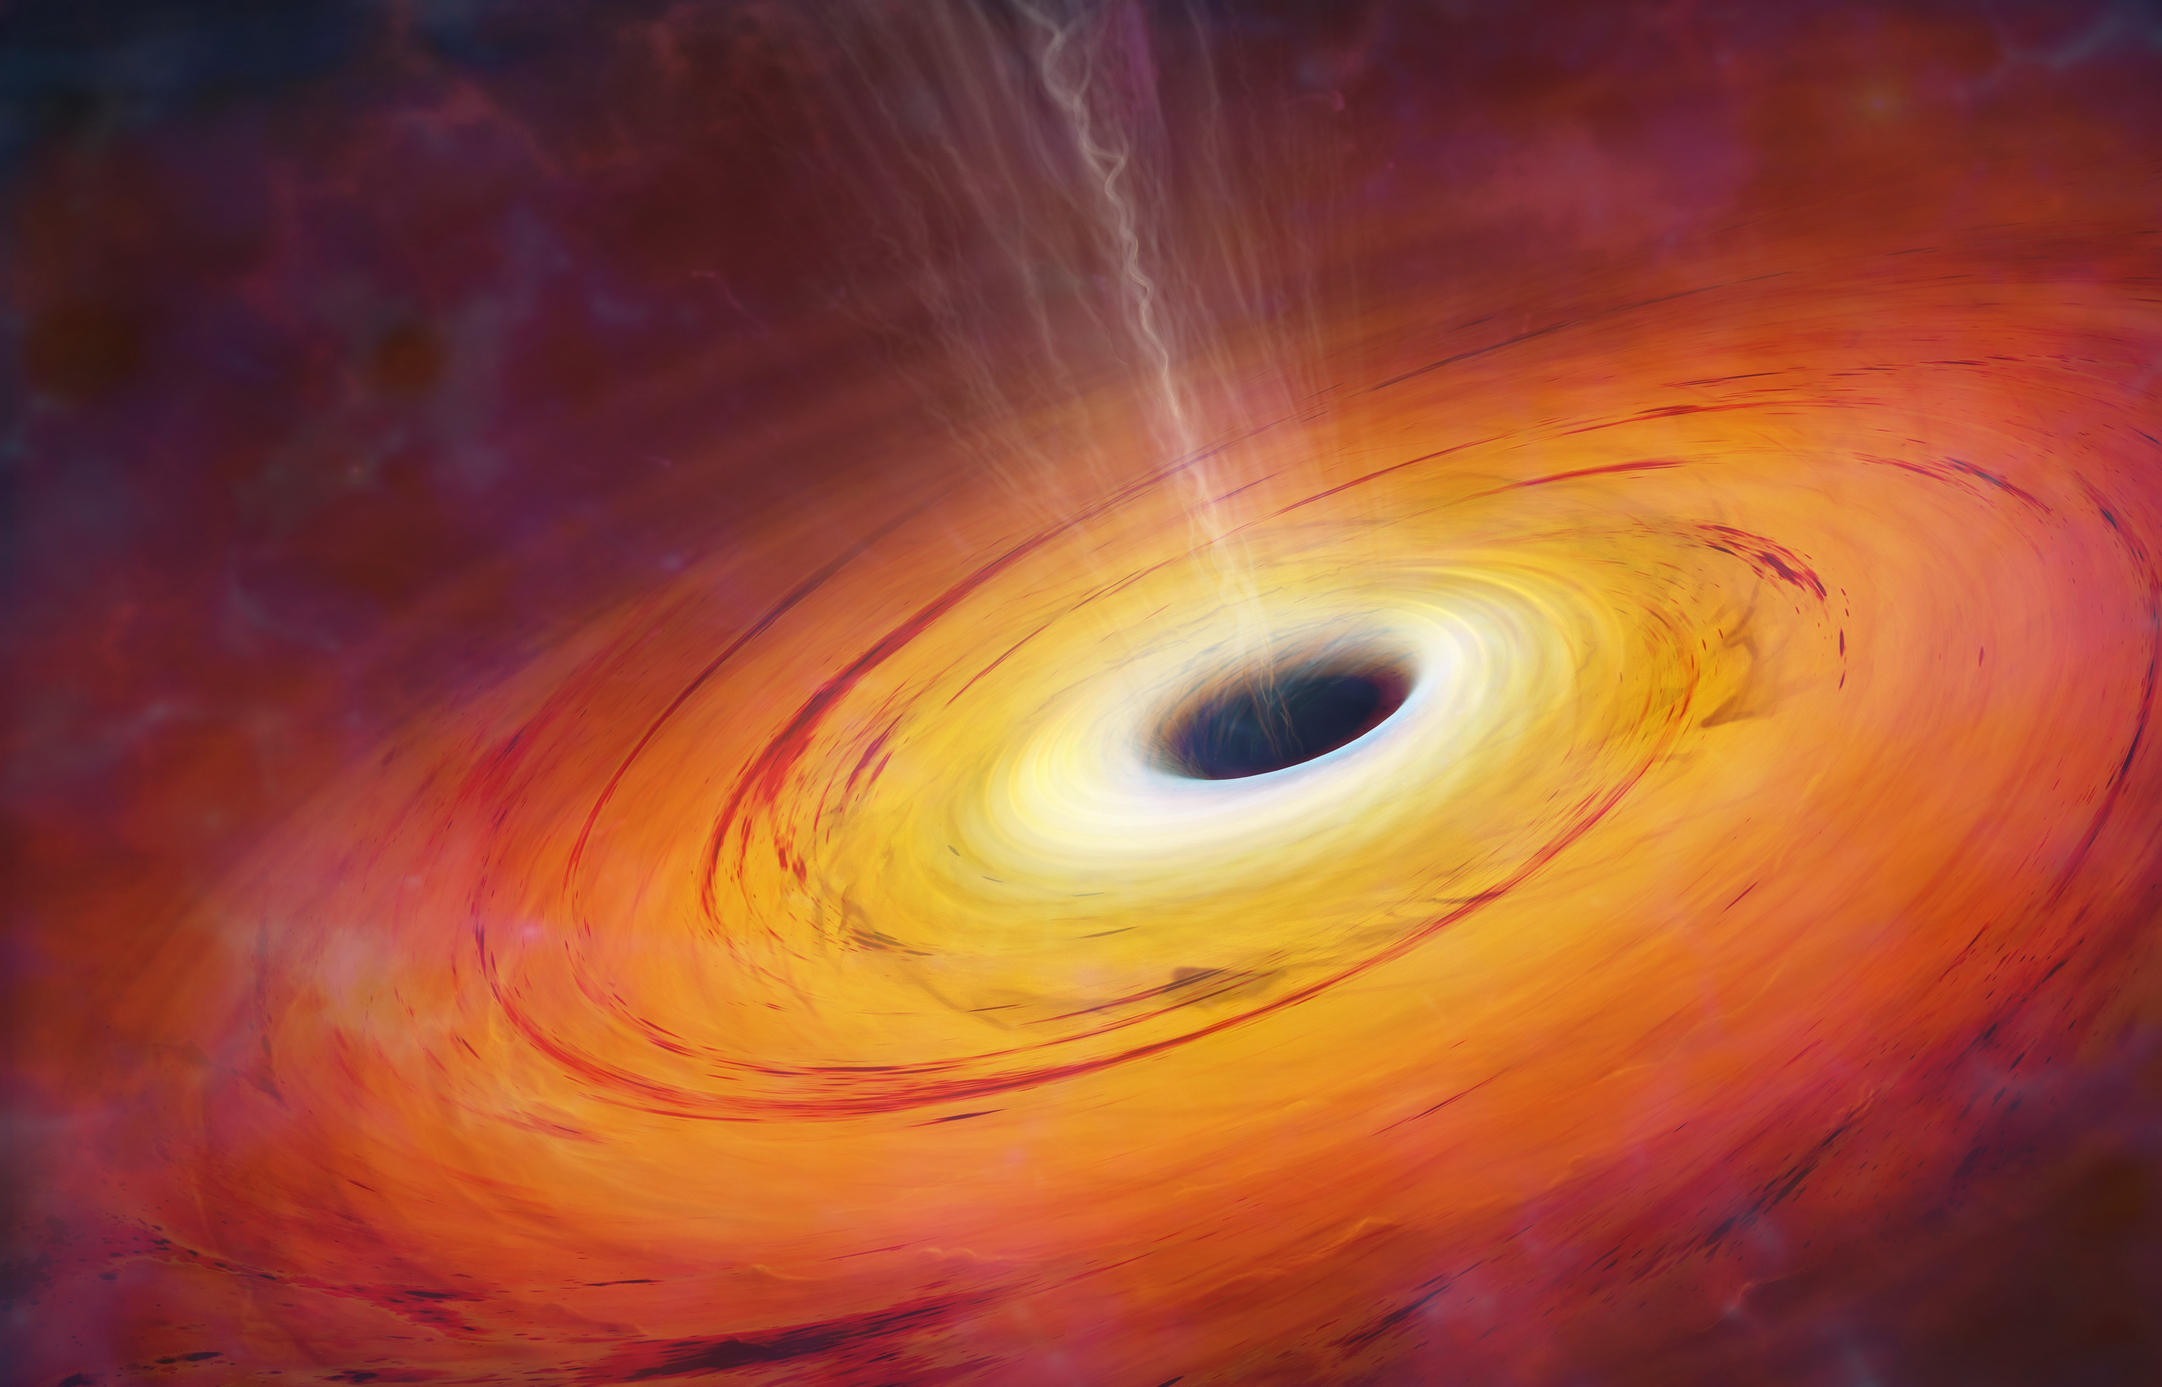 Black Holes Create Mysterious Vortex 'Structures' That Could Open